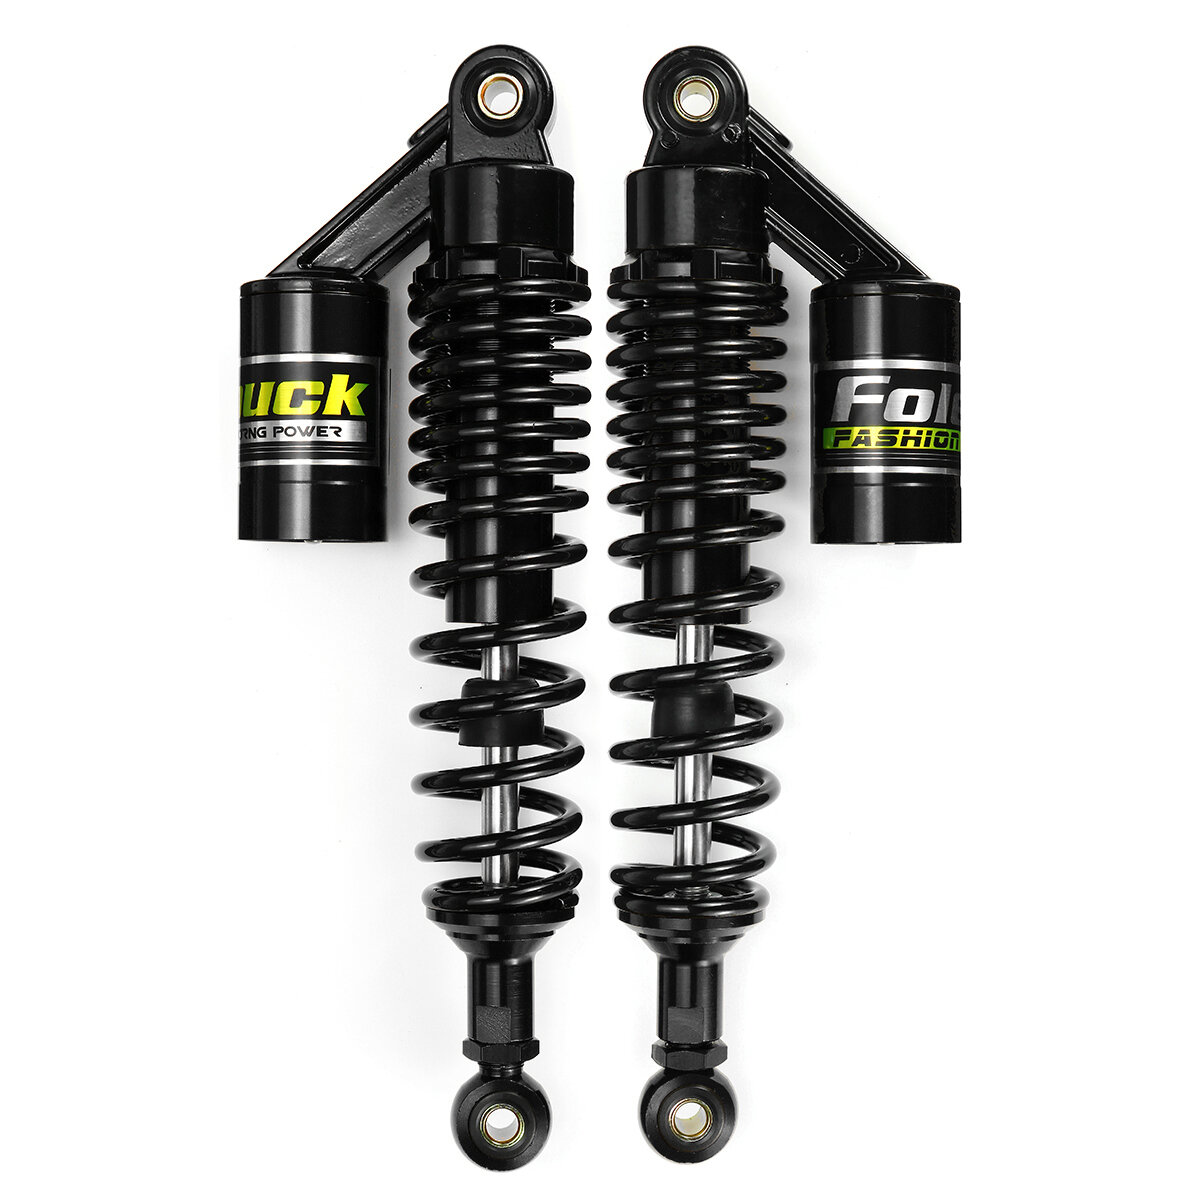 

330mm/12.9" Universal Motorcycle Air Shock Absorber Rear Suspension For Yamaha Motor Scooter ATV Quad Dirt Bike